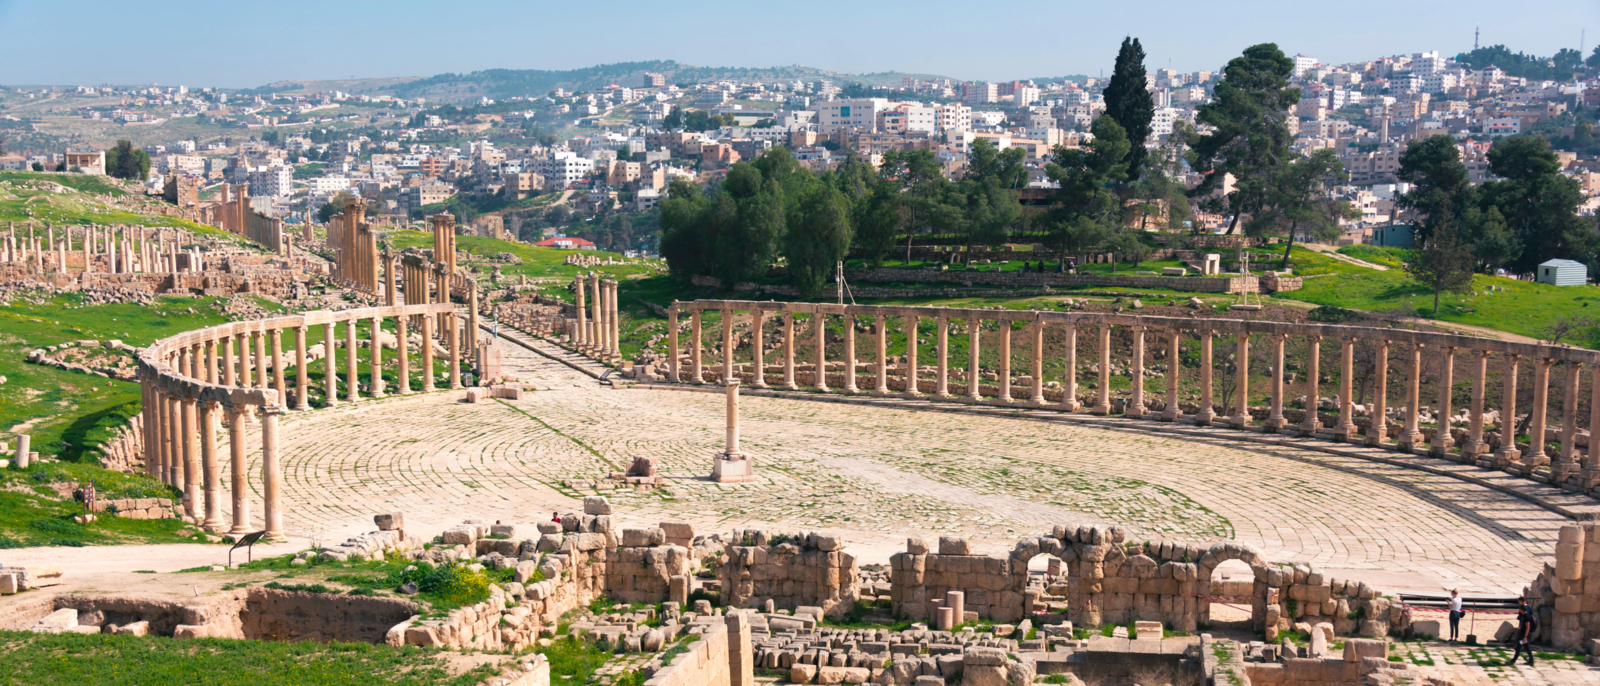 Top view on Forum or Oval Square with ruins foreground in ancient city Jerash and modern city Jerash background